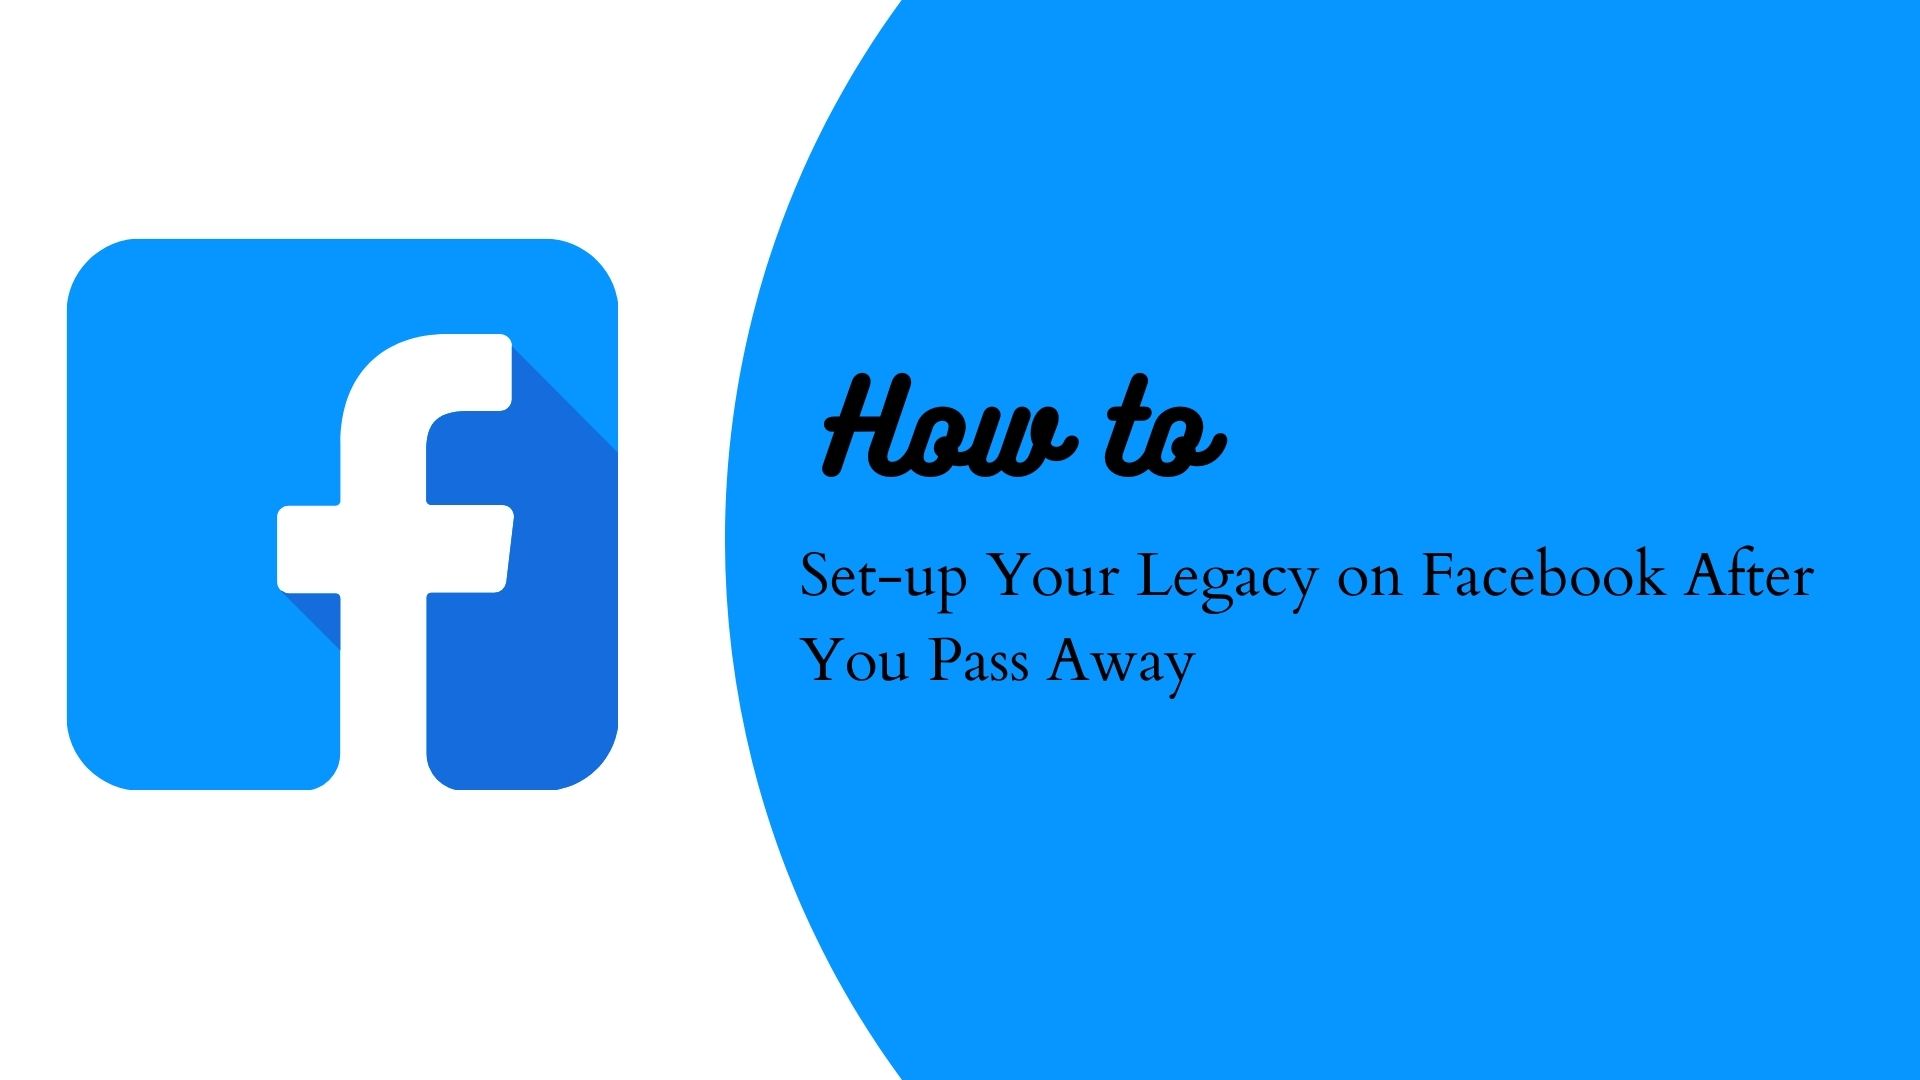 How to Set up Your Legacy on Facebook After You Pass Away